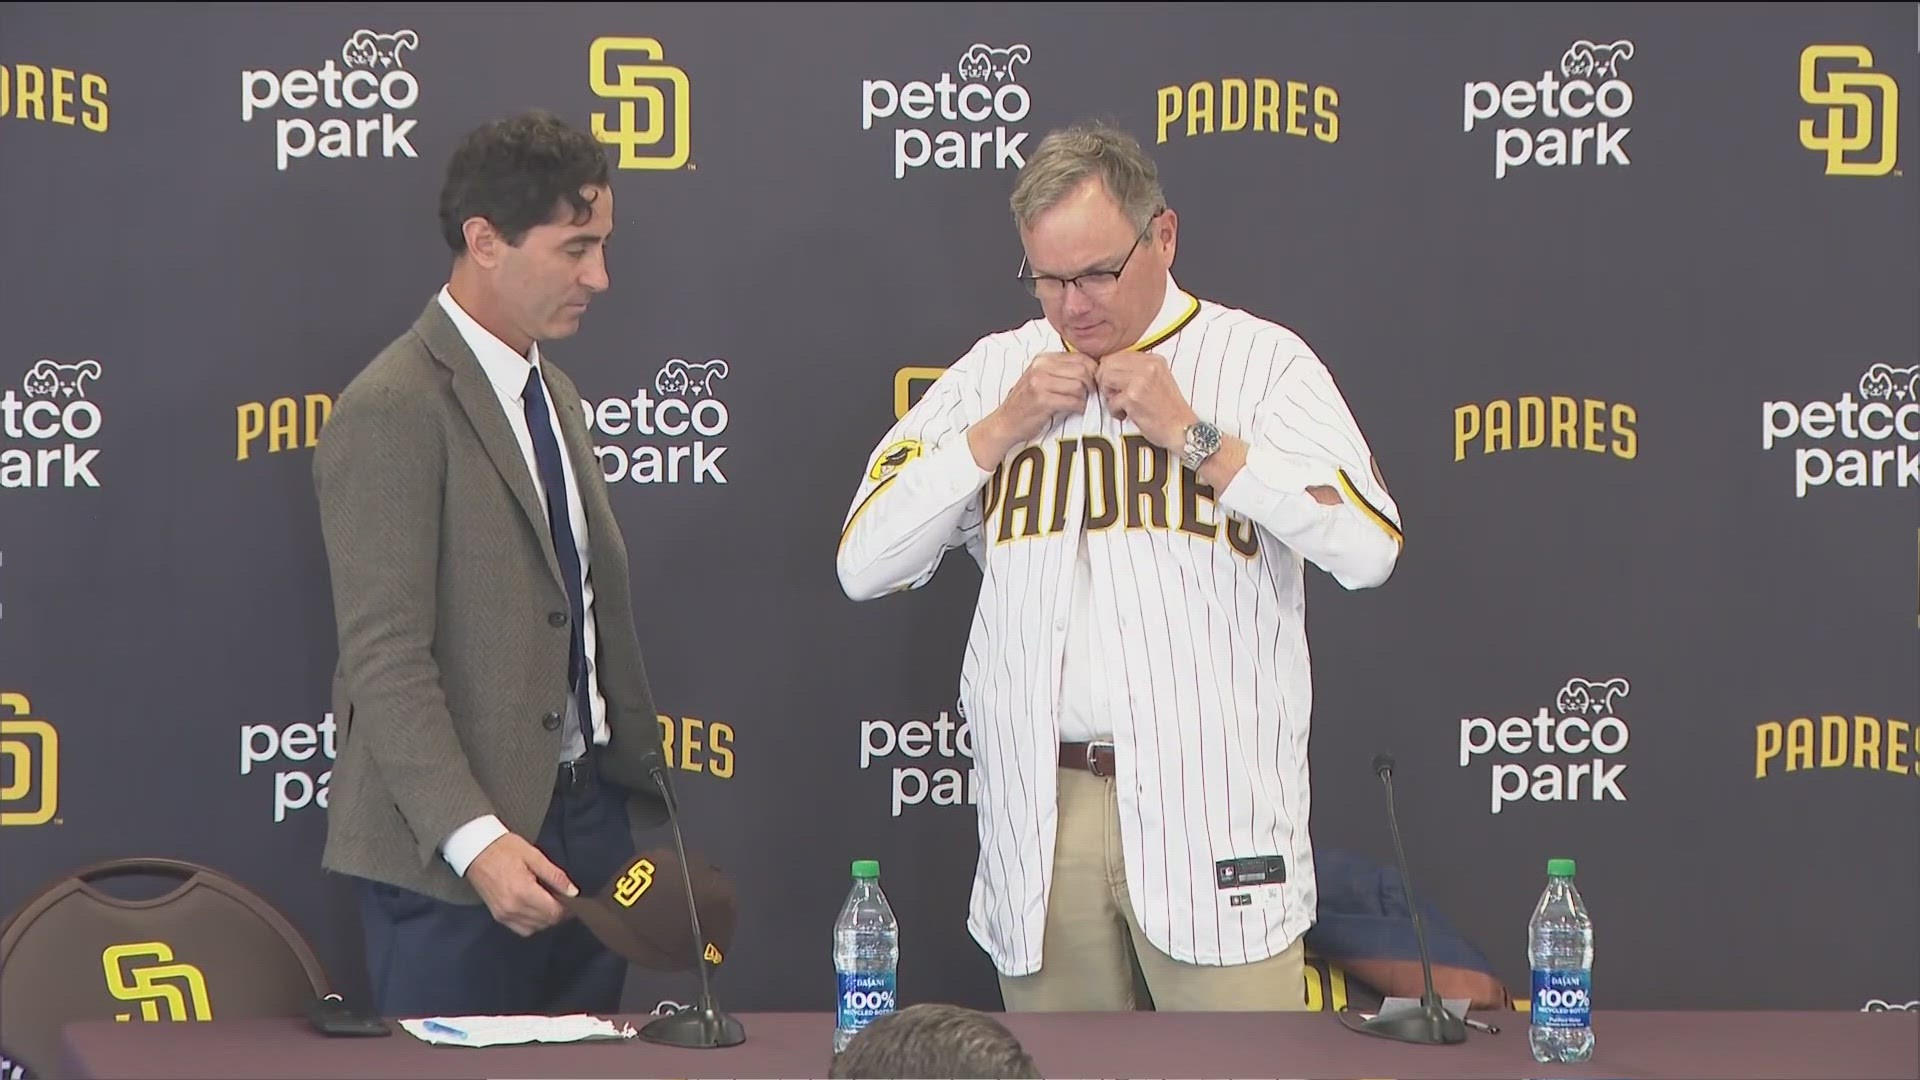 Shildt, 55, has been with the Padres organization since January 2022 as their senior advisor to player development. He previously was manager for the Cardinals.